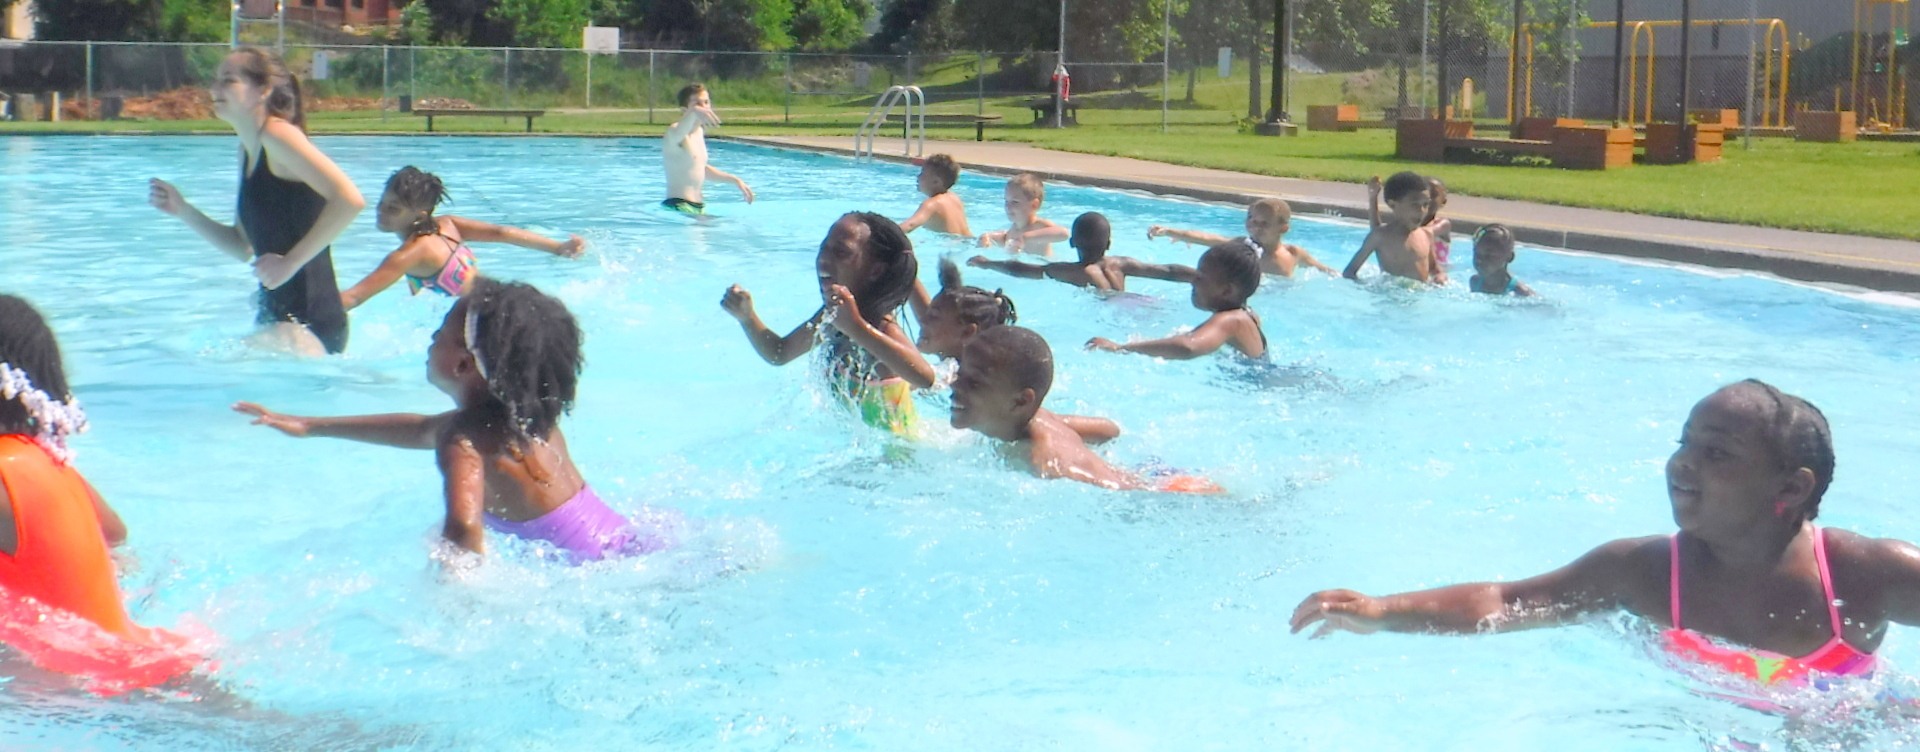 Kids running in the swim pool at The Pittsburgh Project